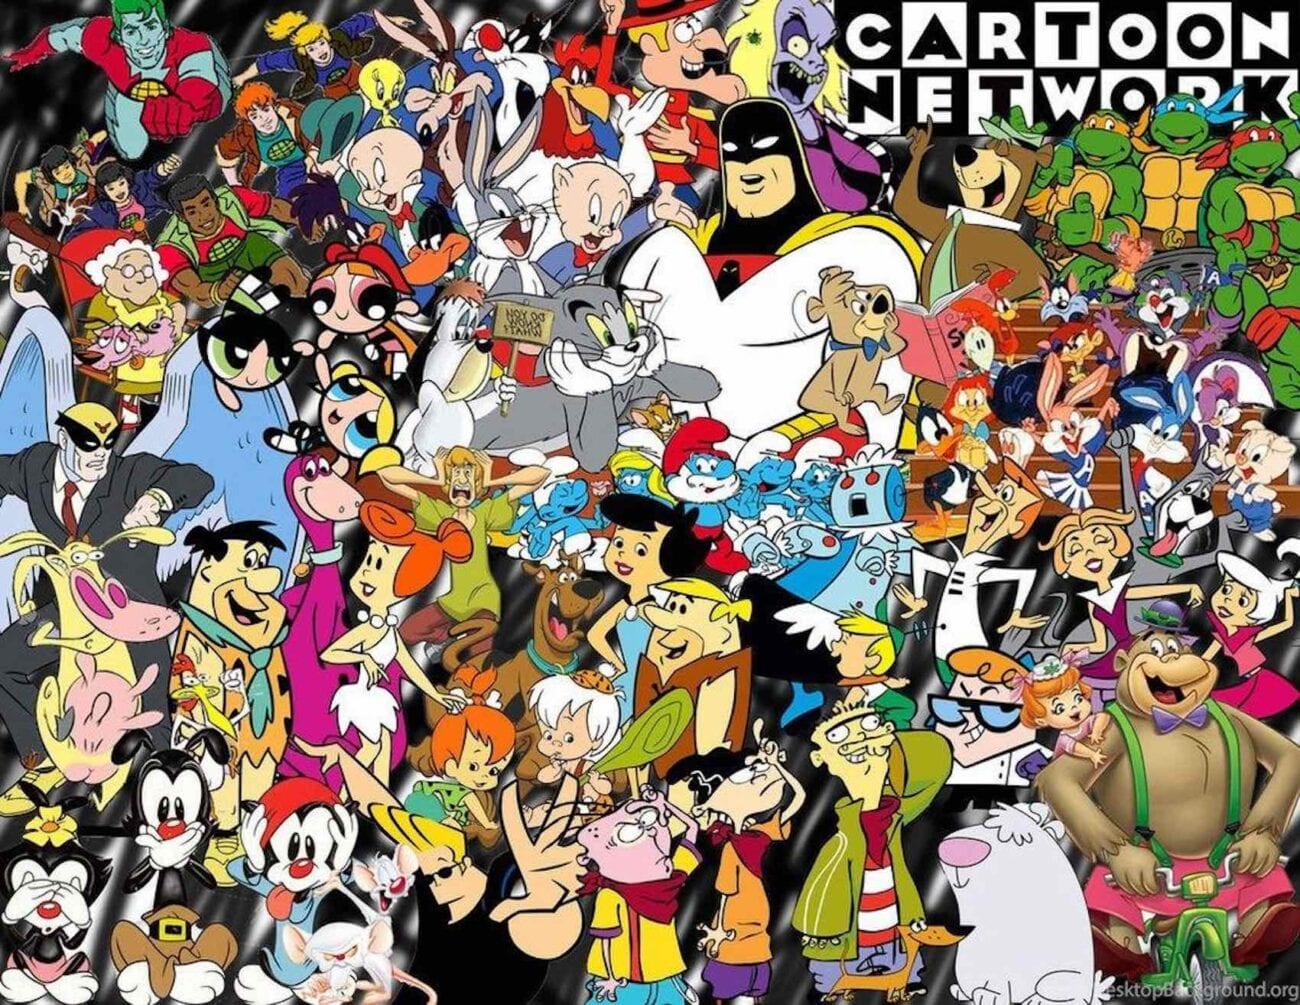 Cartoon Network: These shows from the 2000s were the best of the best